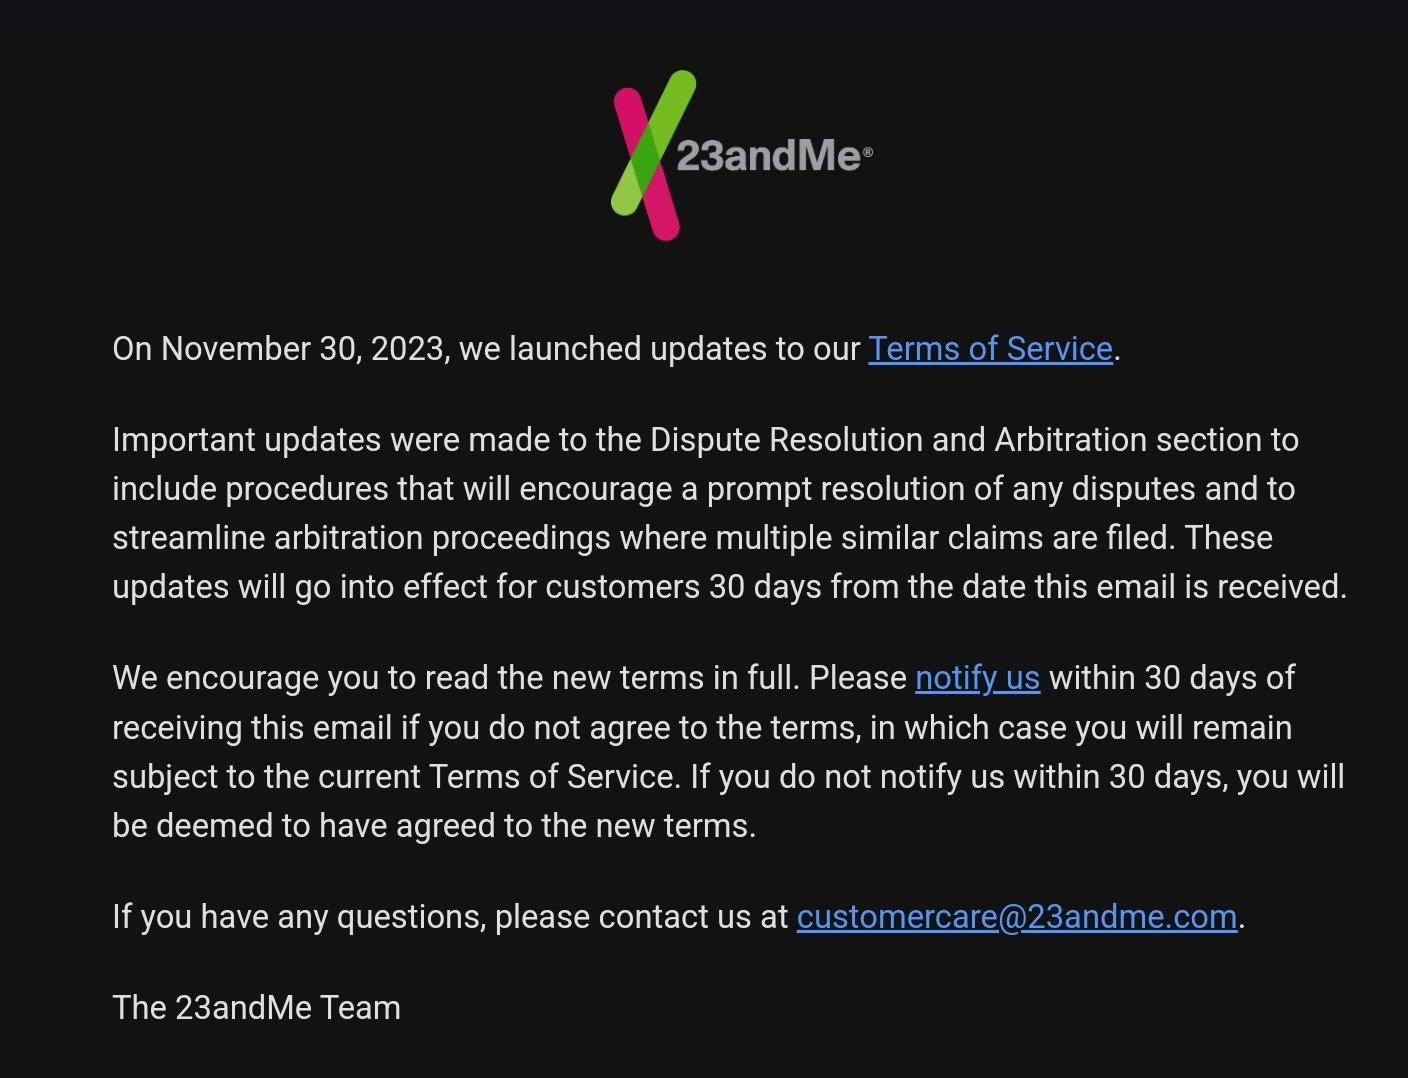 The email sent by 23andMe to its customers about Terms of Service changes.